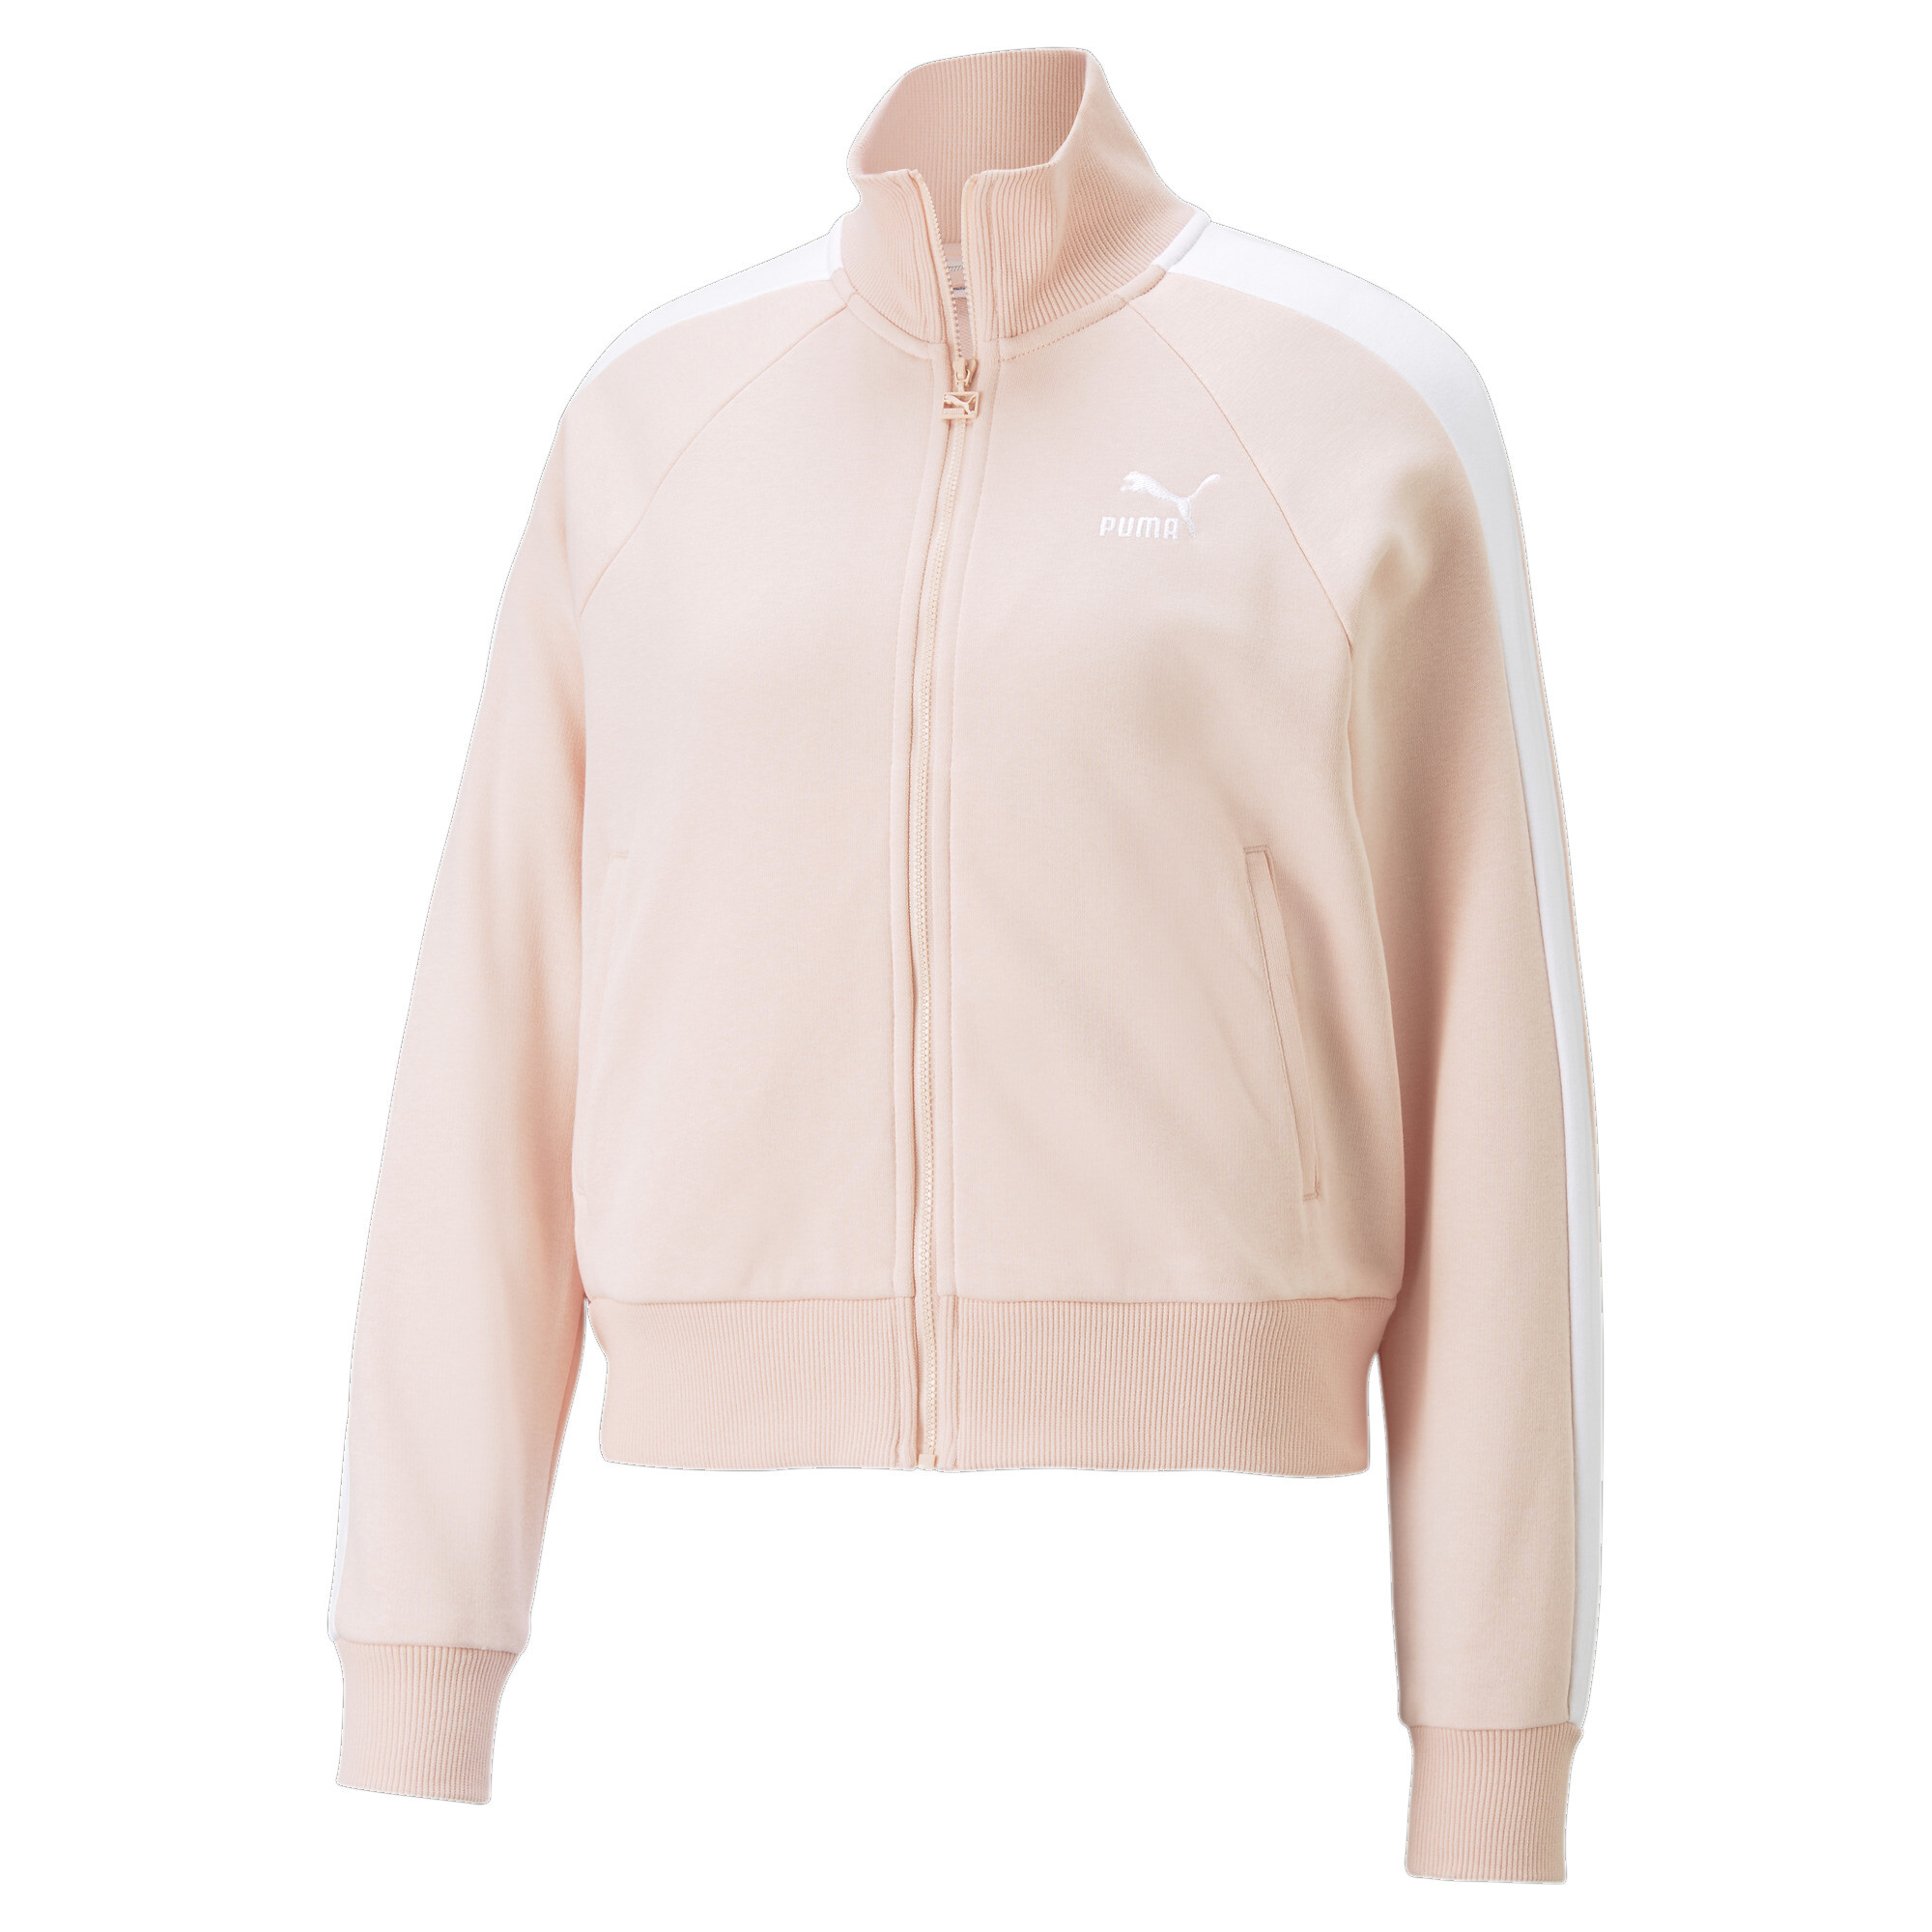 Women's Puma Iconic T7's Track Jacket, Pink, Size L, Clothing